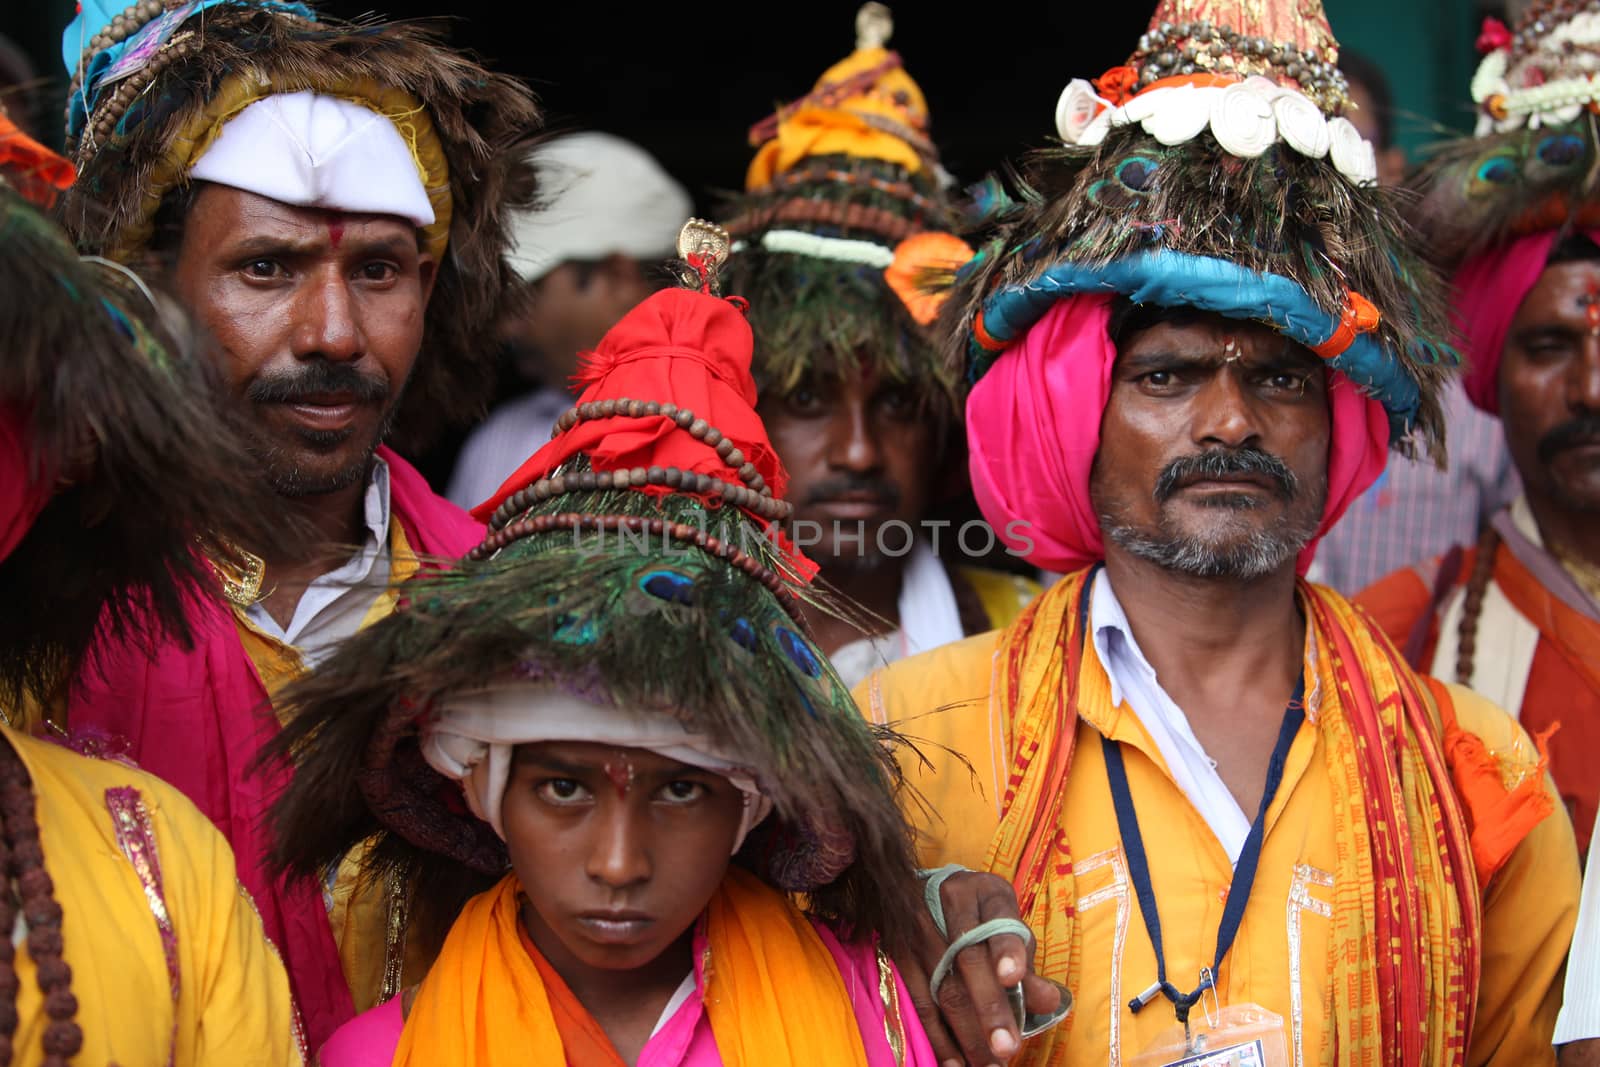 A groups of pilgims traditionally called as Vasudevs wearing their typical peacock feather hat.